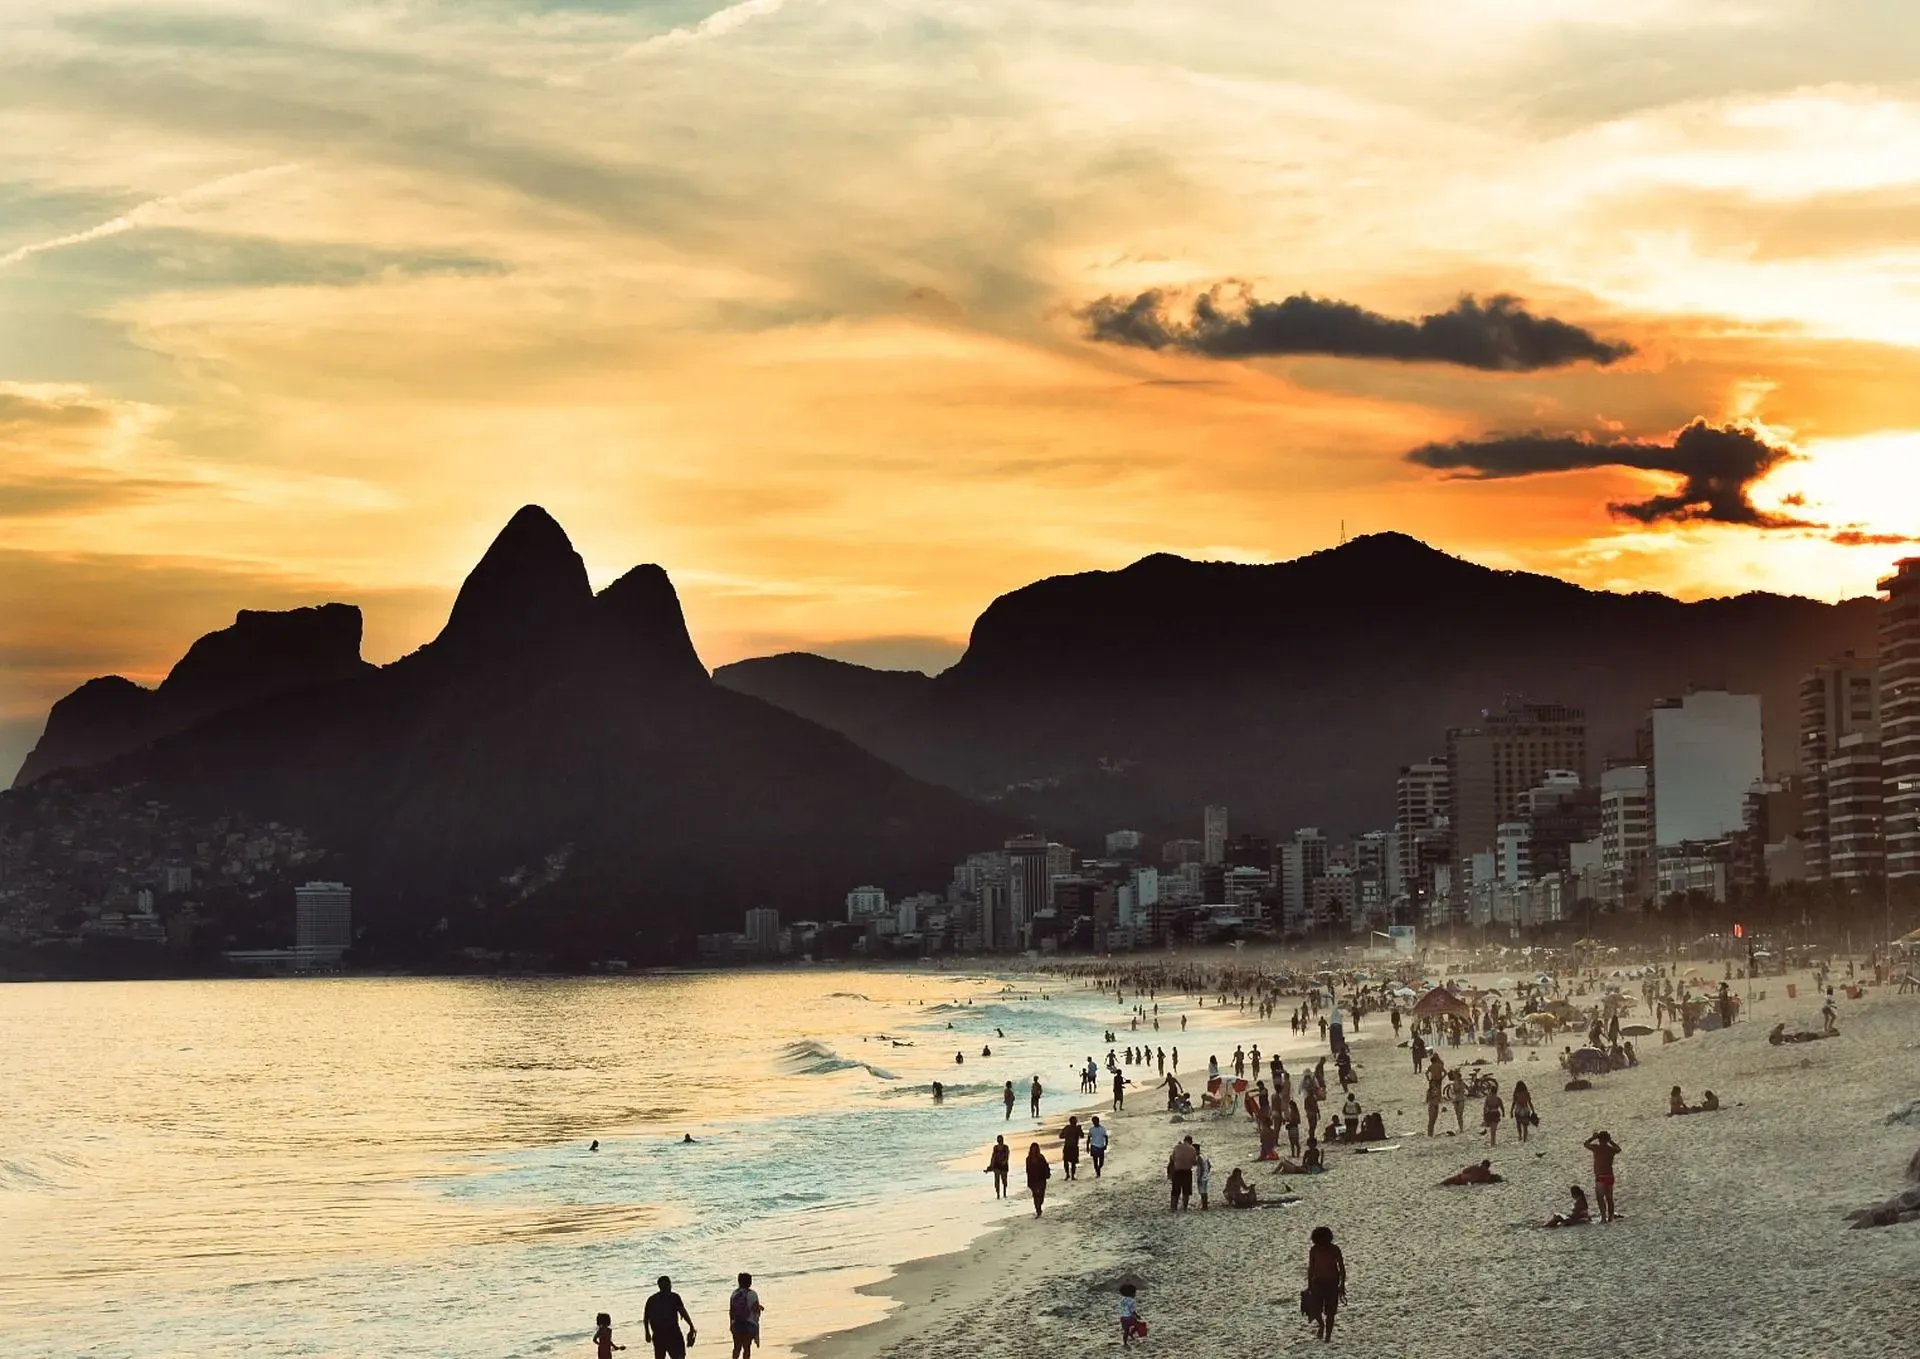 Brazil beaches facts will help you identify the best beaches along the long coastline.